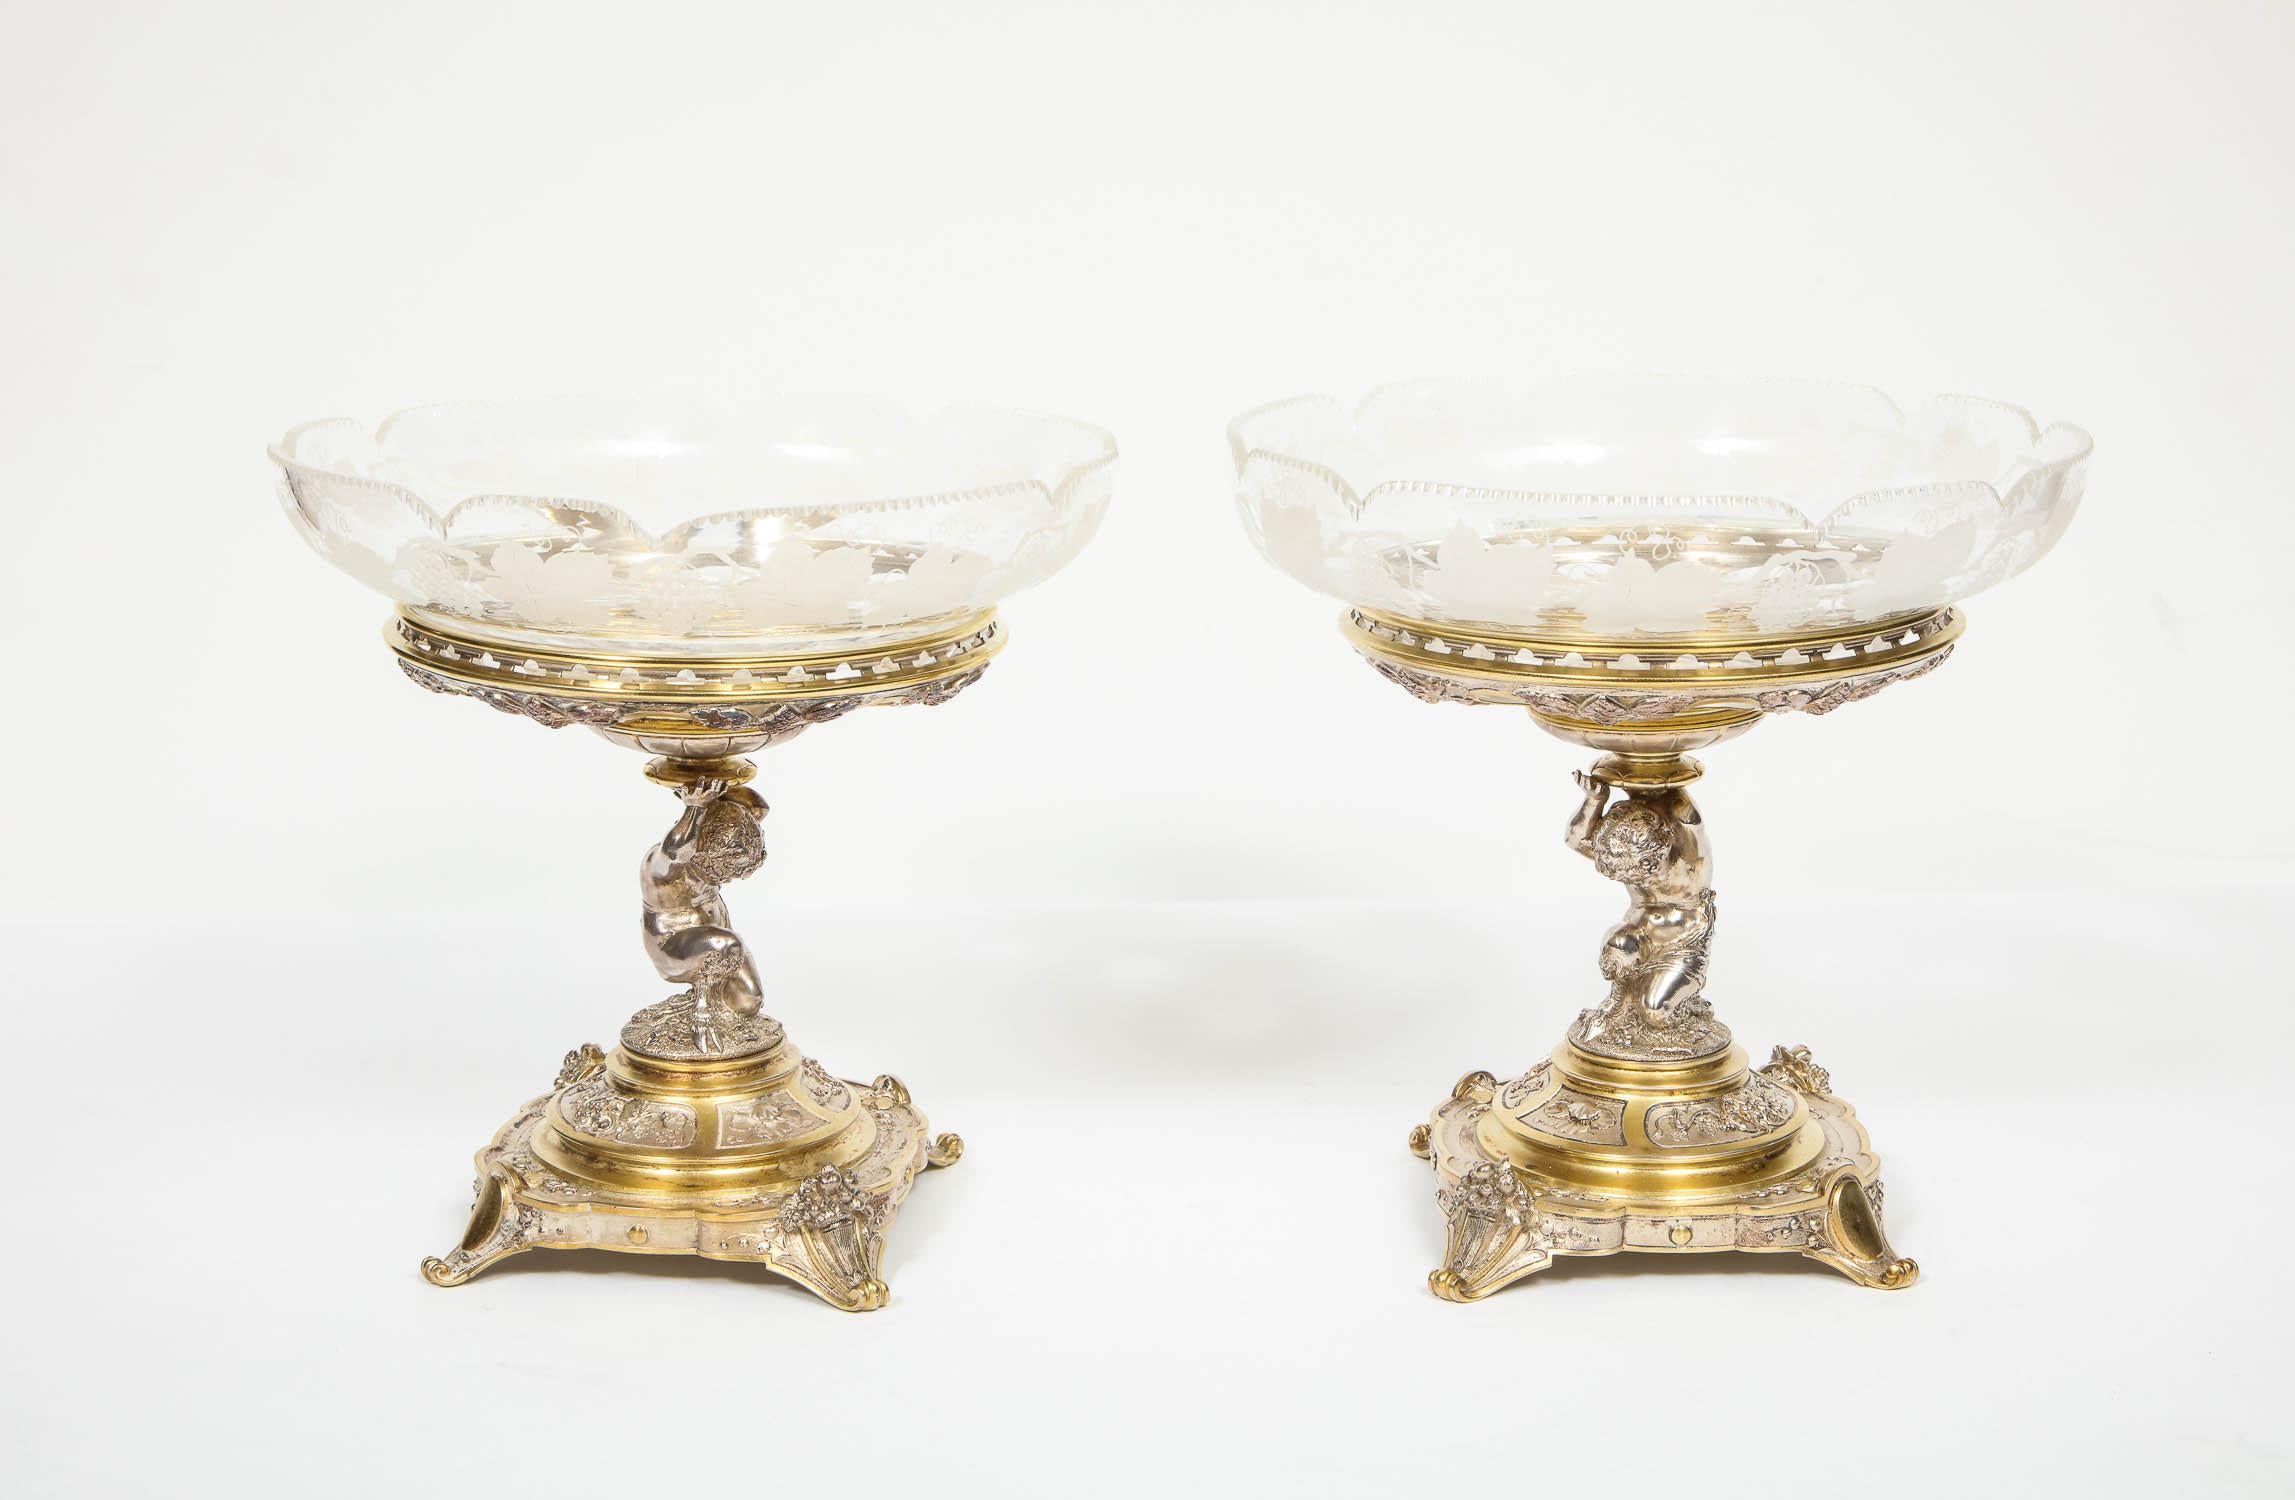 British Elkington & Co., a Pair of Gilt and Silvered Bronze Tazza Centerpieces